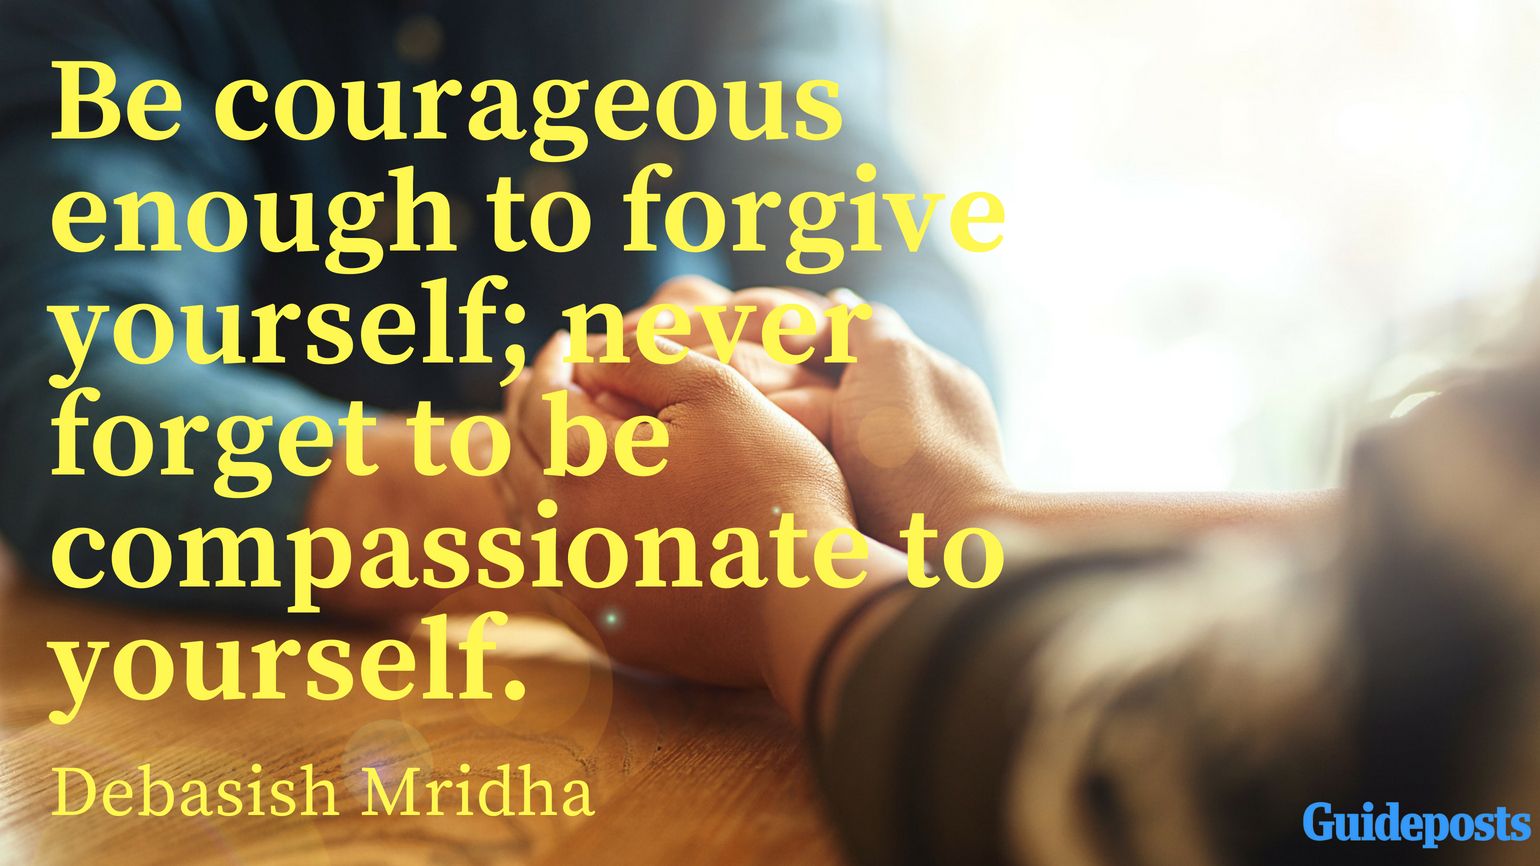 Be courageous enough to forgive yourself; never forget to be compassionate to yourself. ― Debasish Mridha